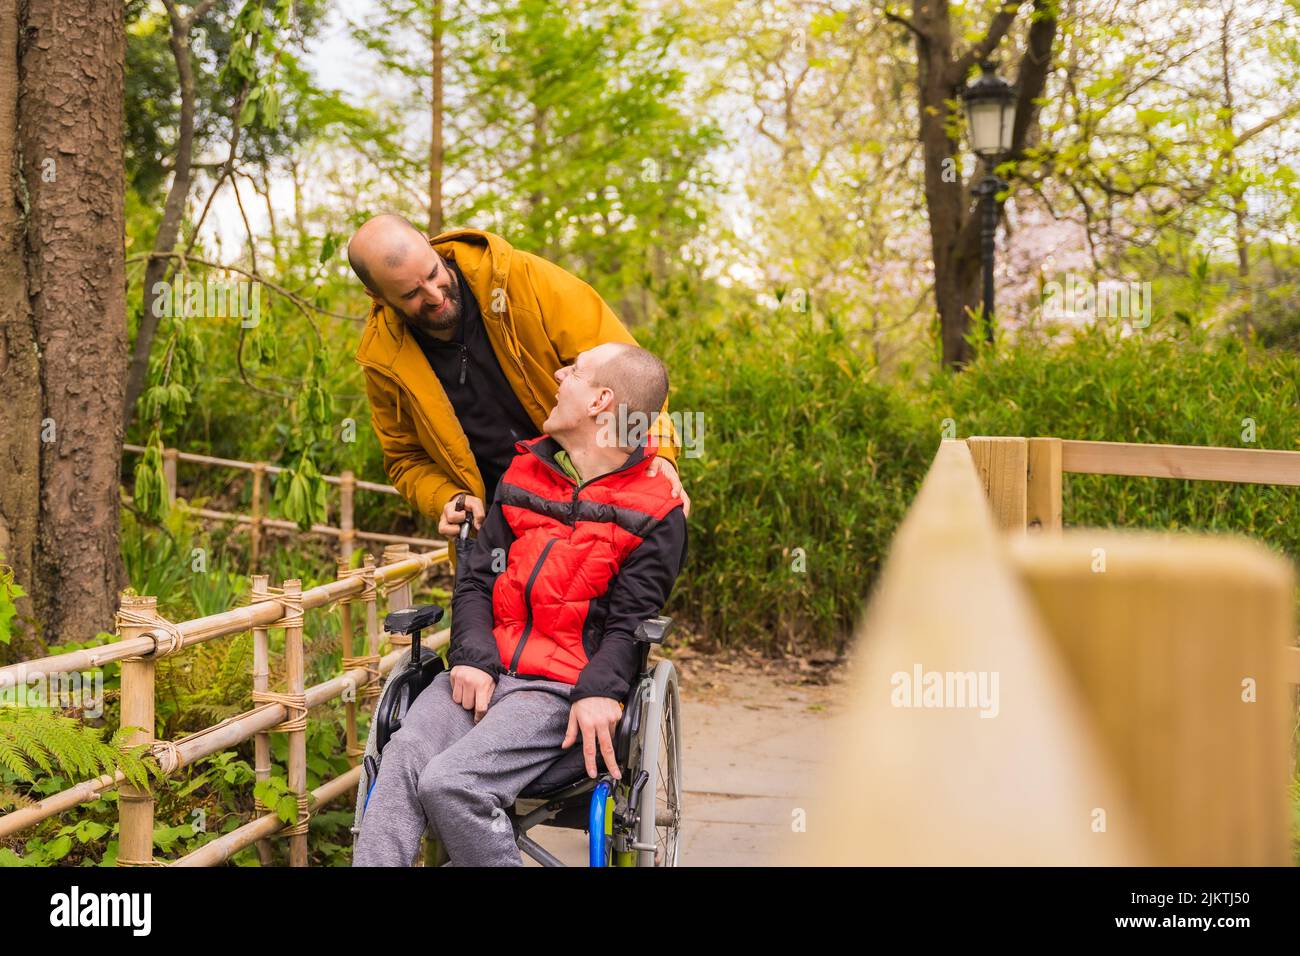 Paralyzed young man in the wheelchair being pushed by a friend in a public city park, looking at each other and smiling Stock Photo